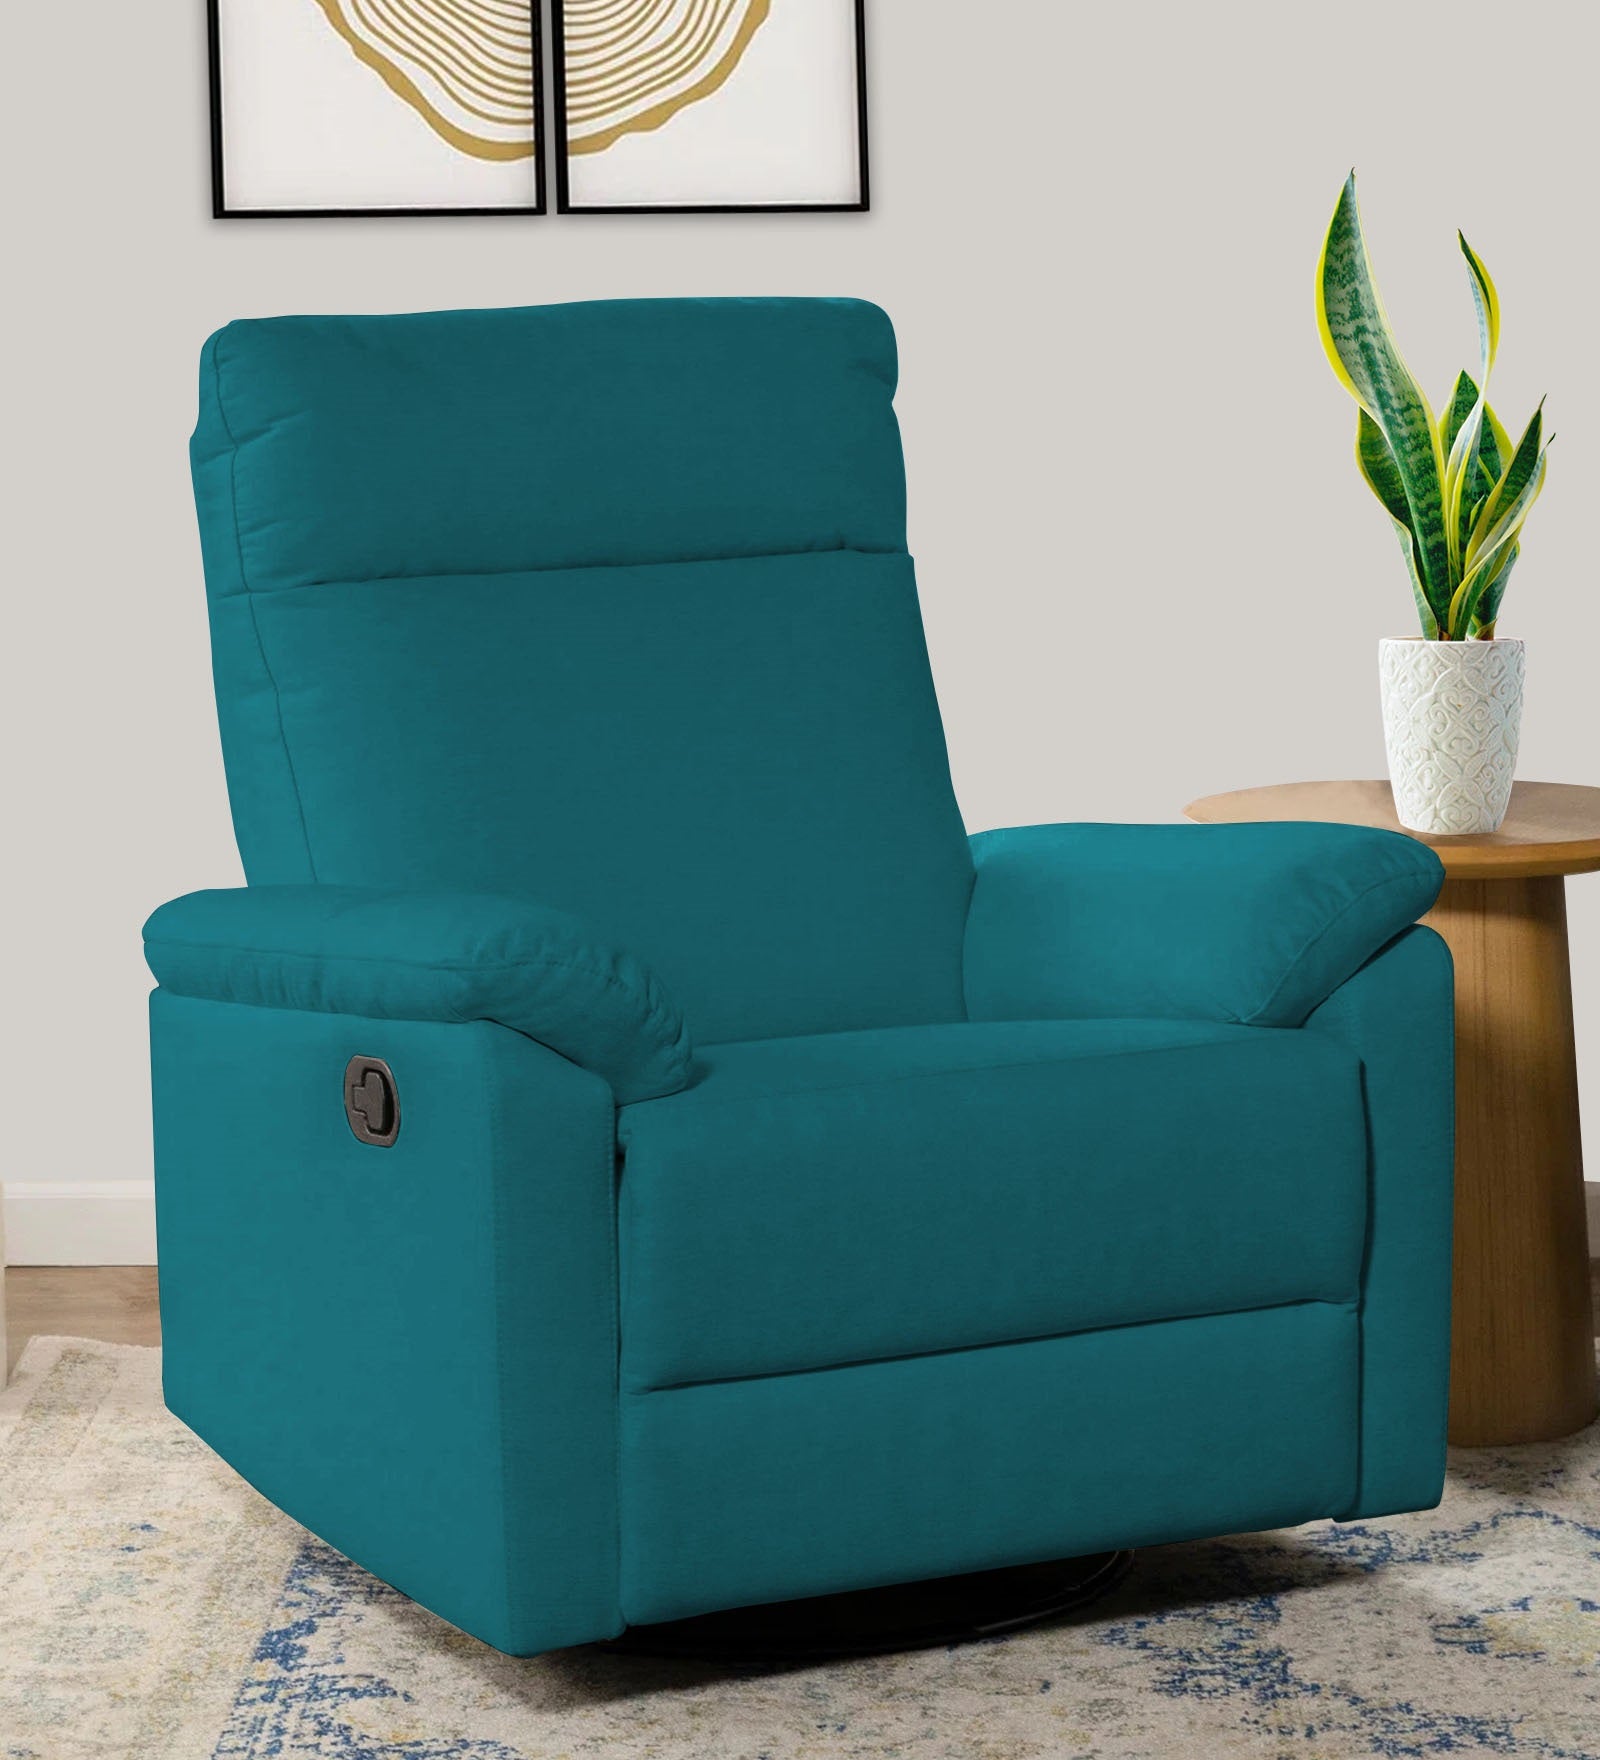 Mandy Fabric Manual 1 Seater Recliner In Pine Green Colour